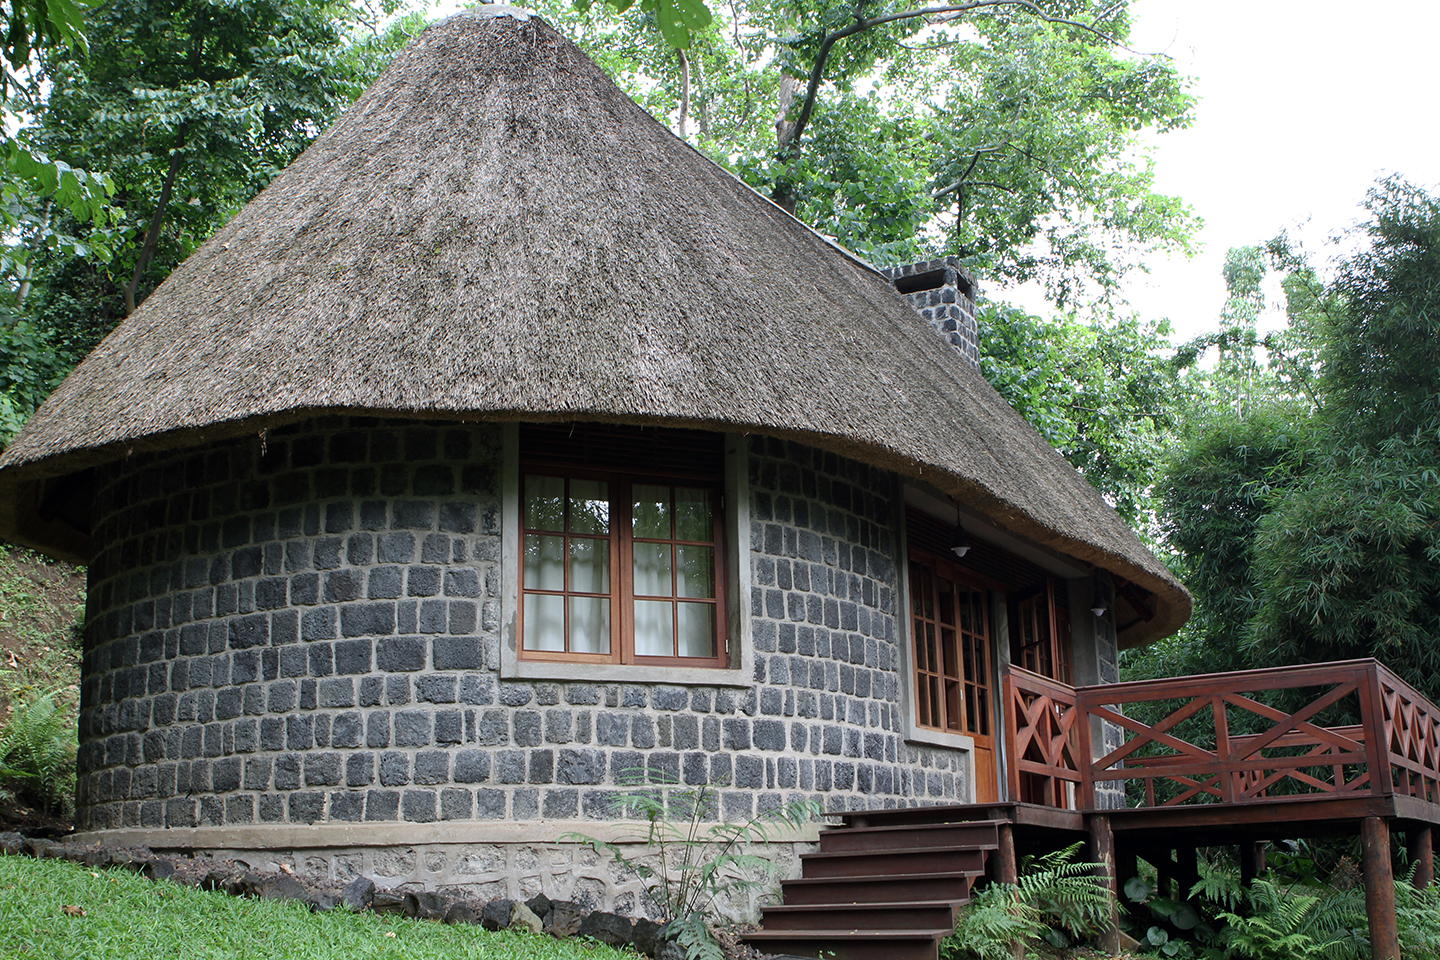 Lovey chalet - Mikeno lodge